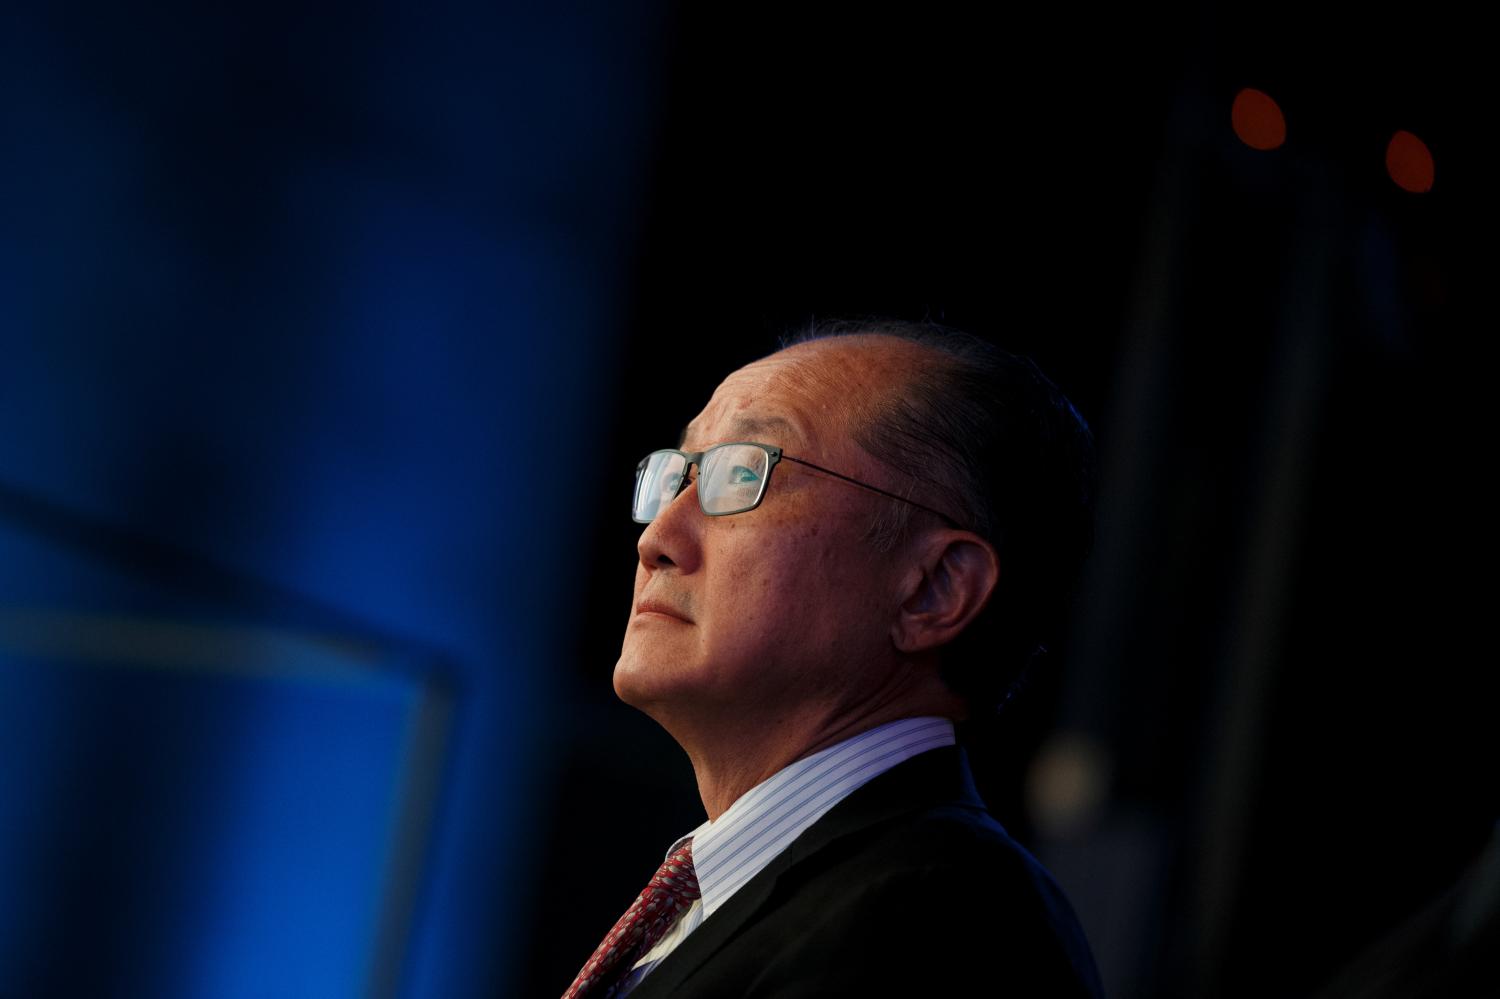 World Bank President Jim Yong Kim attends the opening ceremony of the Reinvented Toilet Expo showcasing sewerless sanitation technology in Beijing, November 6, 2018.  REUTERS/Thomas Peter - RC1CA0B6A1E0